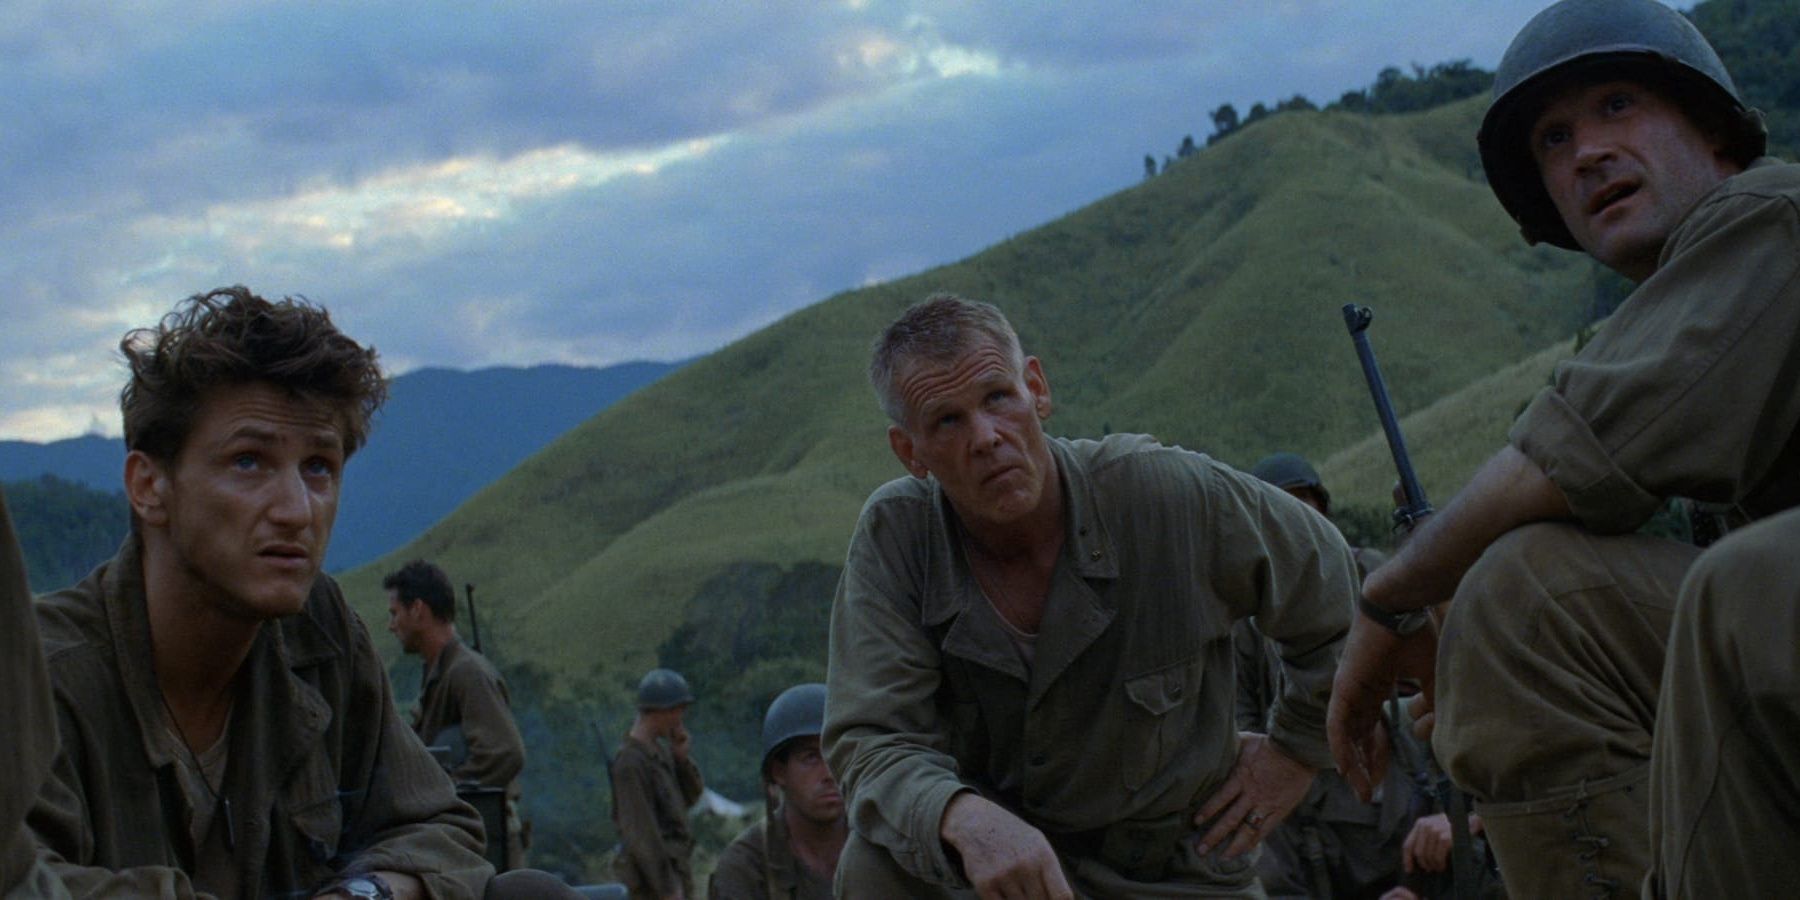 Sean Penn, Nick Nolte, and Elias Koteas on a battlefield in The Thin Red Line